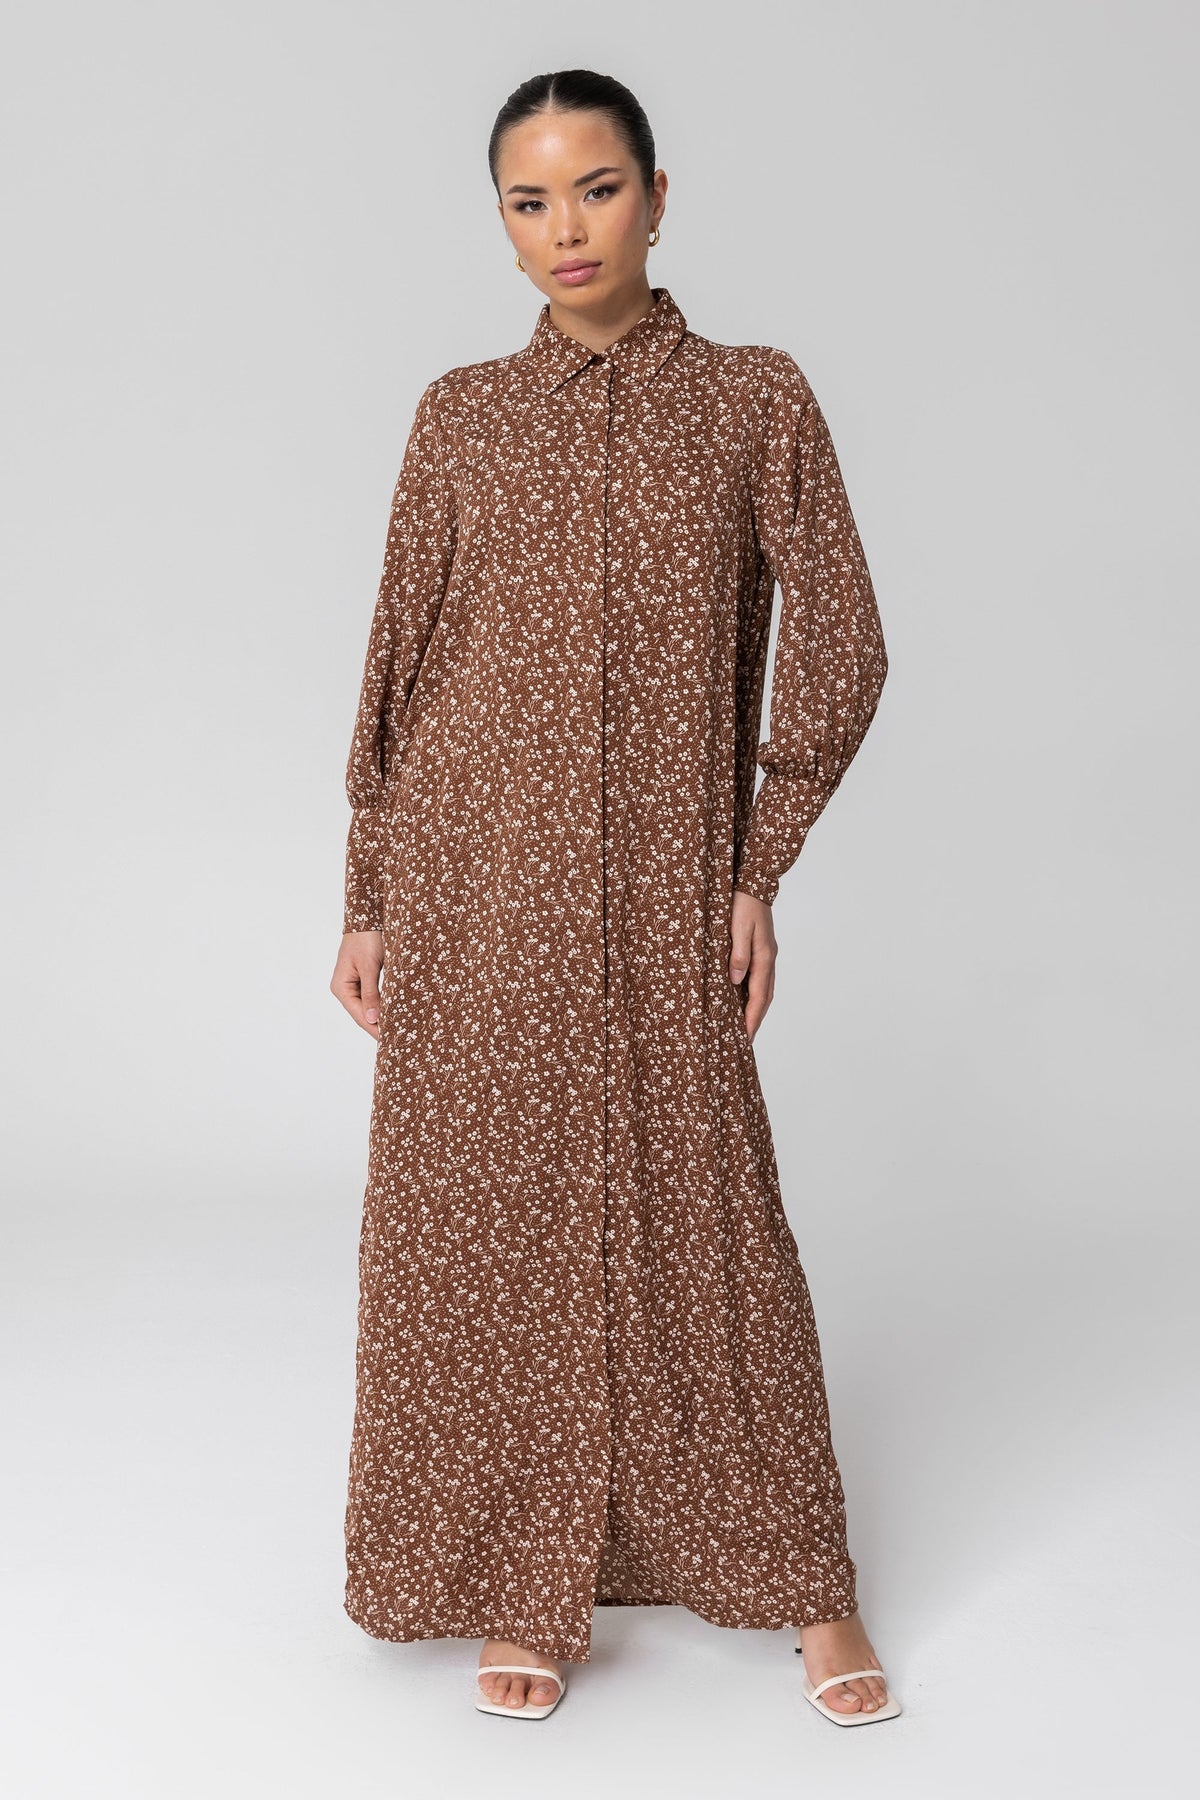 Brown Floral Button Down Maxi Shirt Dress Veiled Collection 